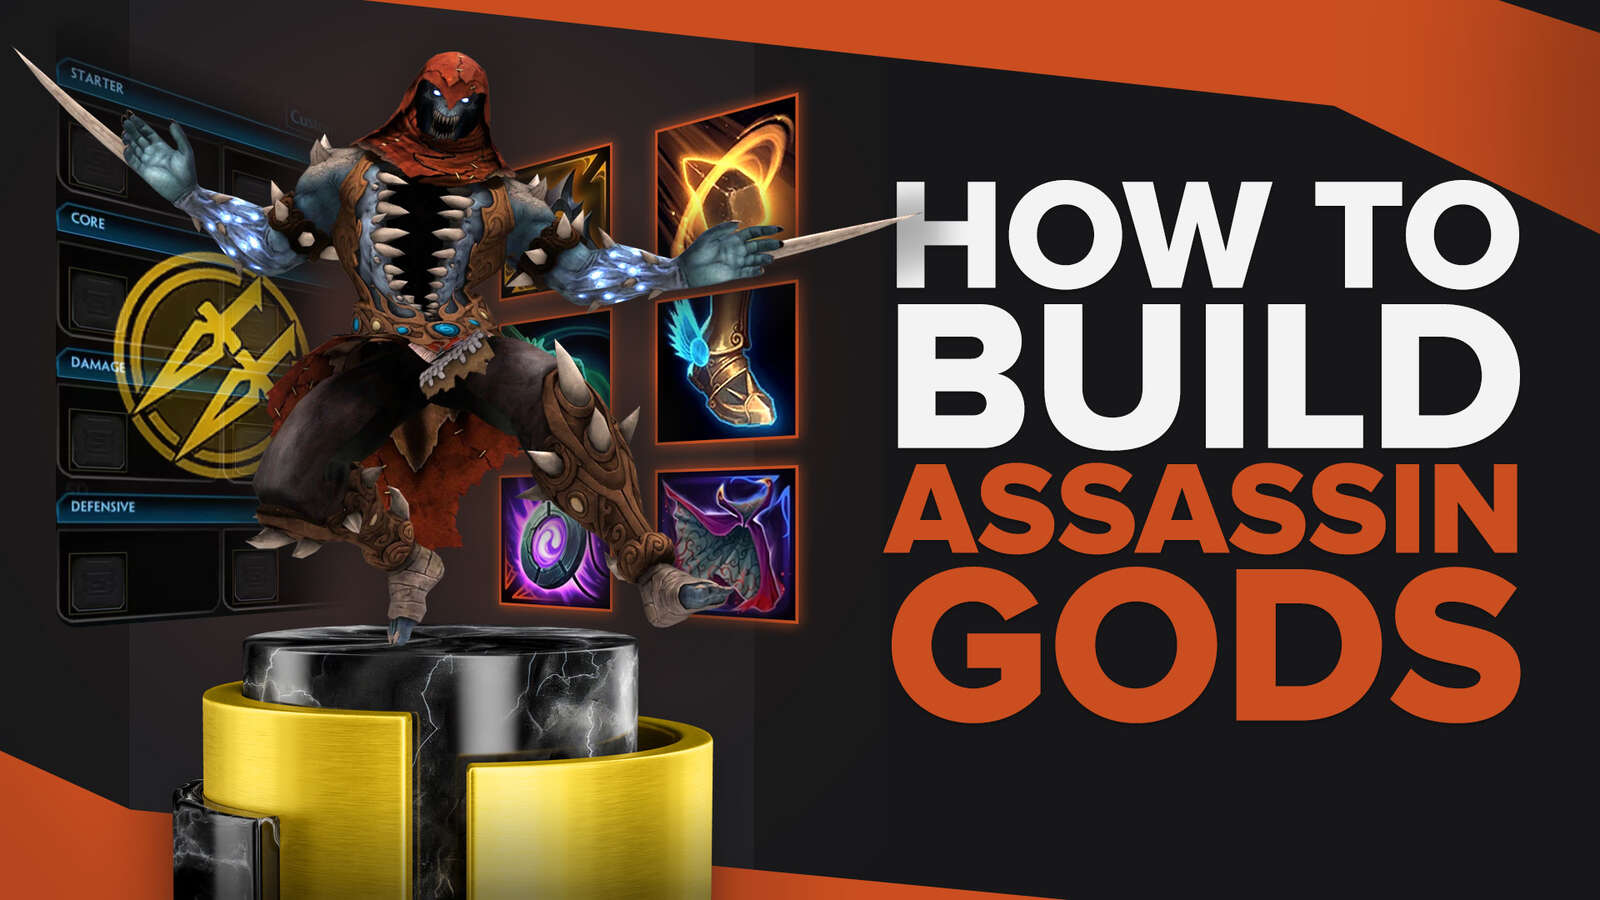 How To Build Overpowered Assbuttin Gods in Smite